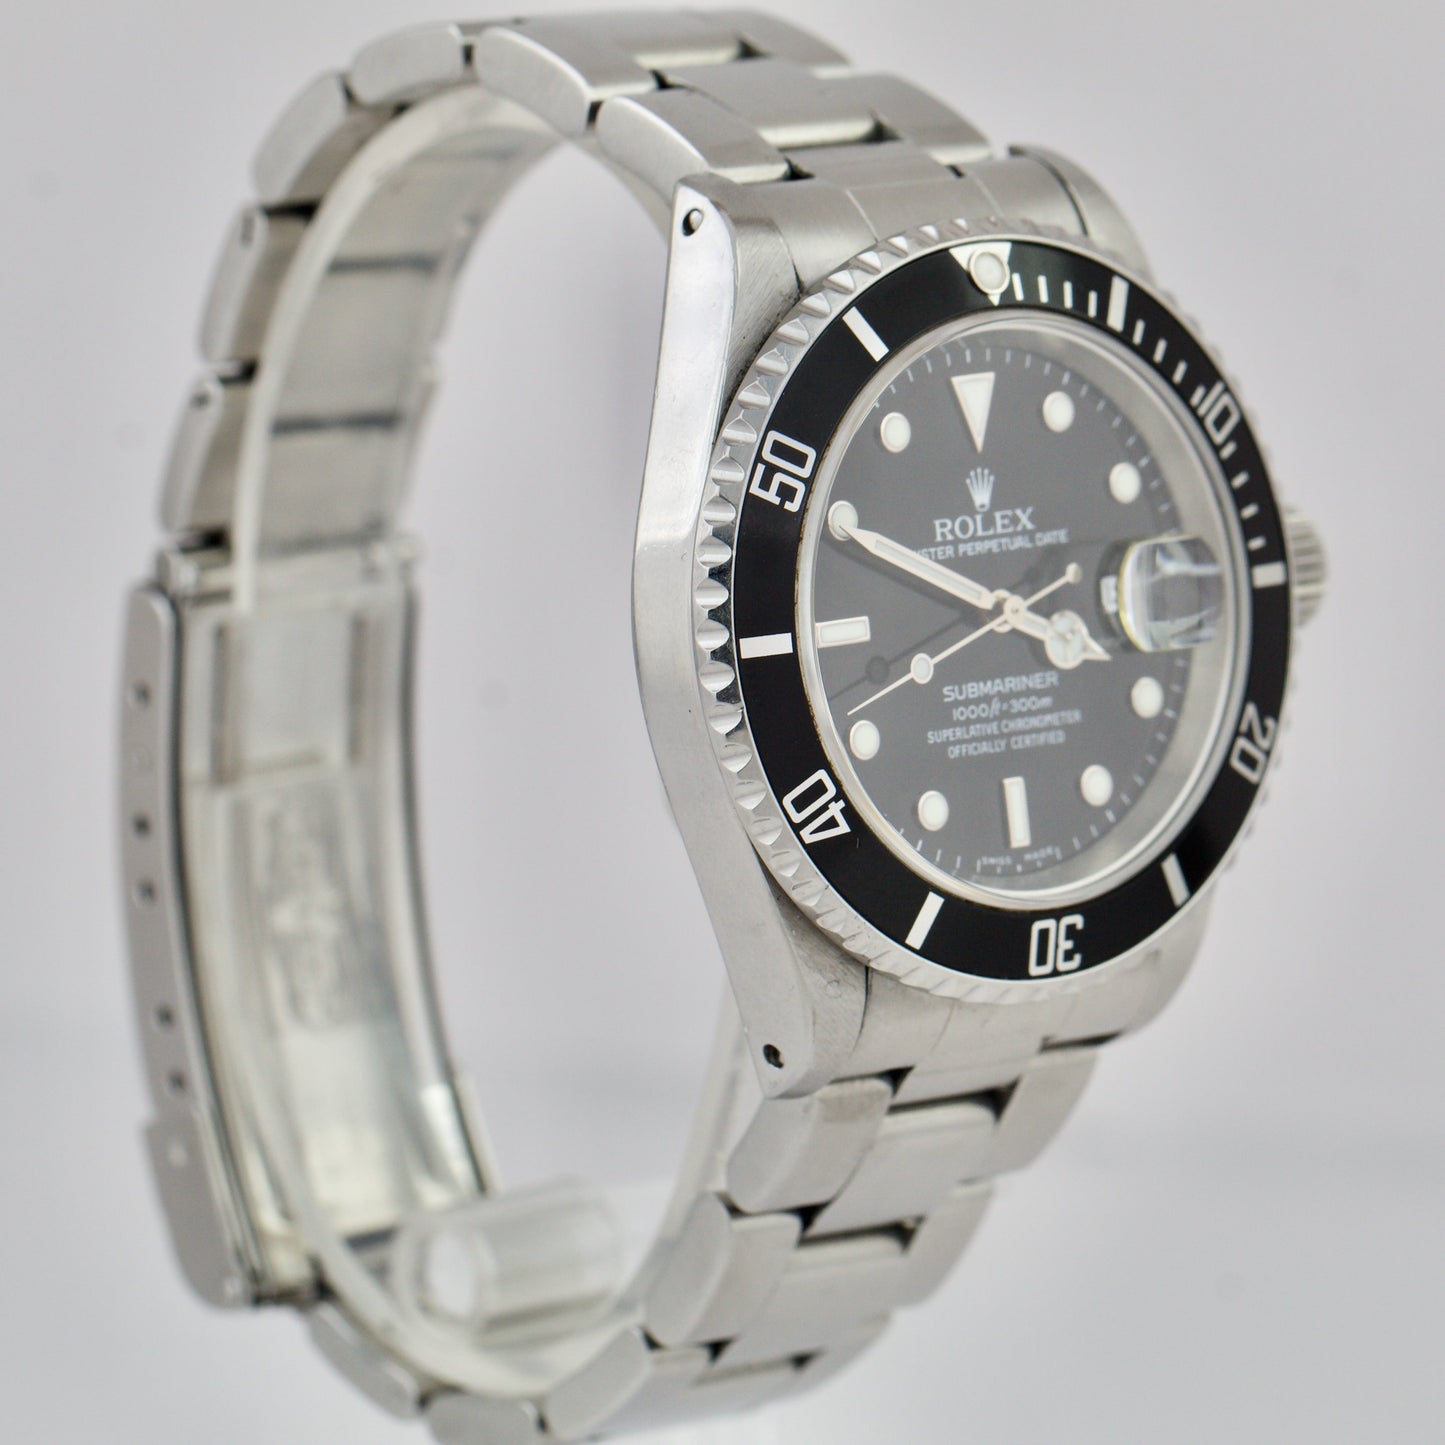 UNPOLISHED Rolex Submariner Date 40mm BLACK Stainless Steel Dive Watch 16610